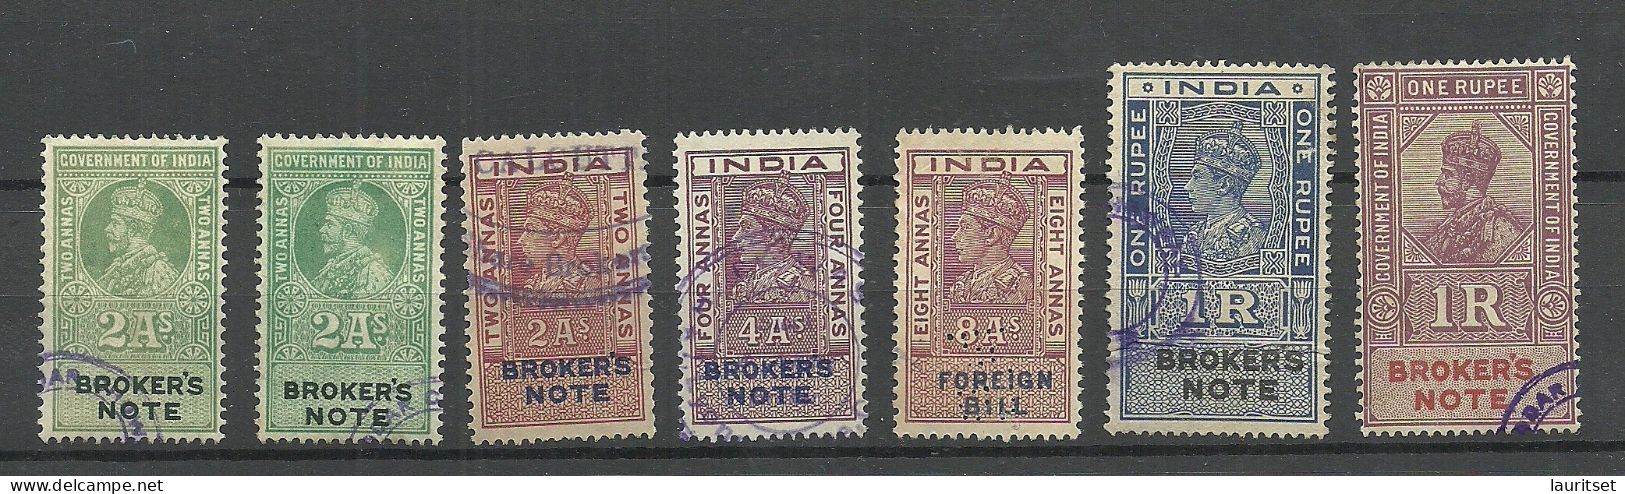 INDIA Brokers Note Revenue Tax, 7 Stamps, O - Official Stamps